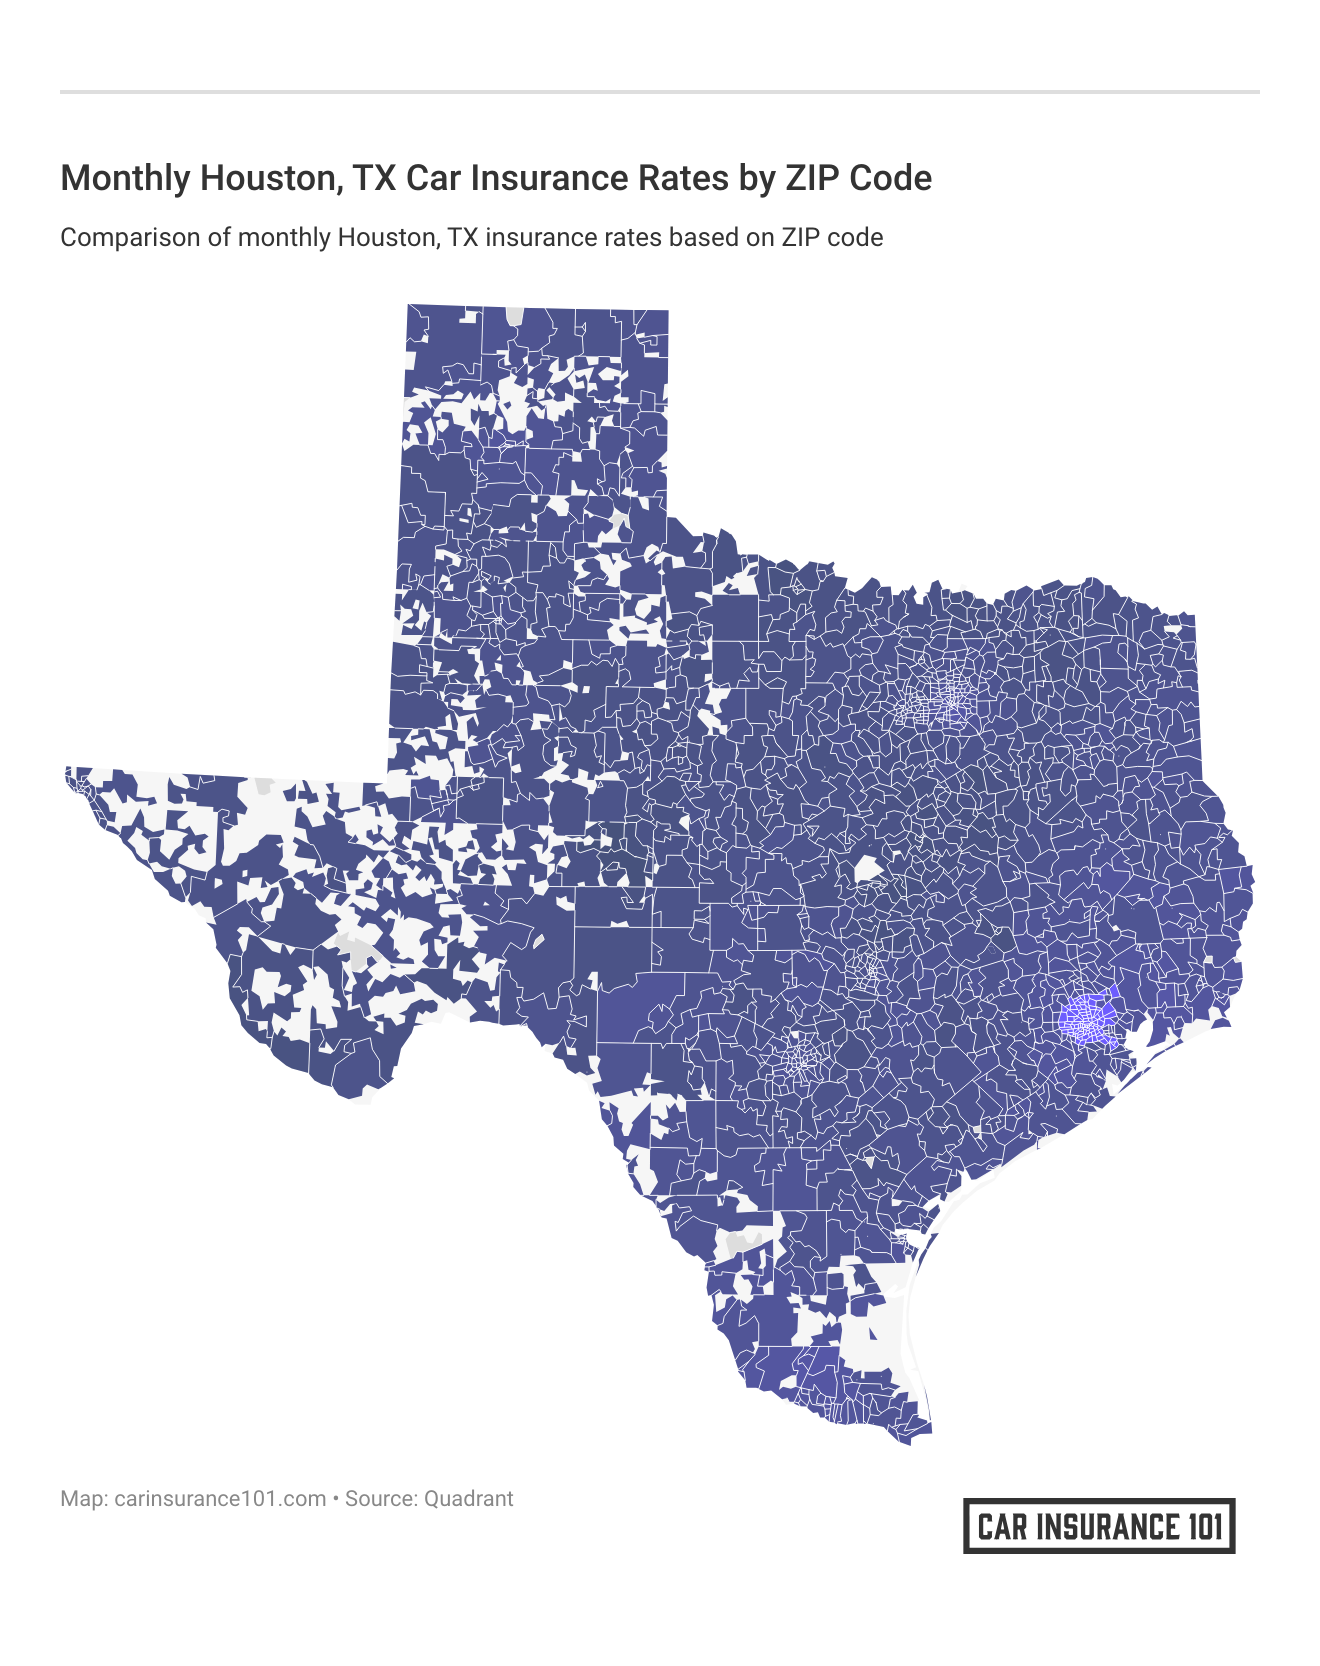 <h3>Monthly Houston, TX Car Insurance Rates by ZIP Code</h3>